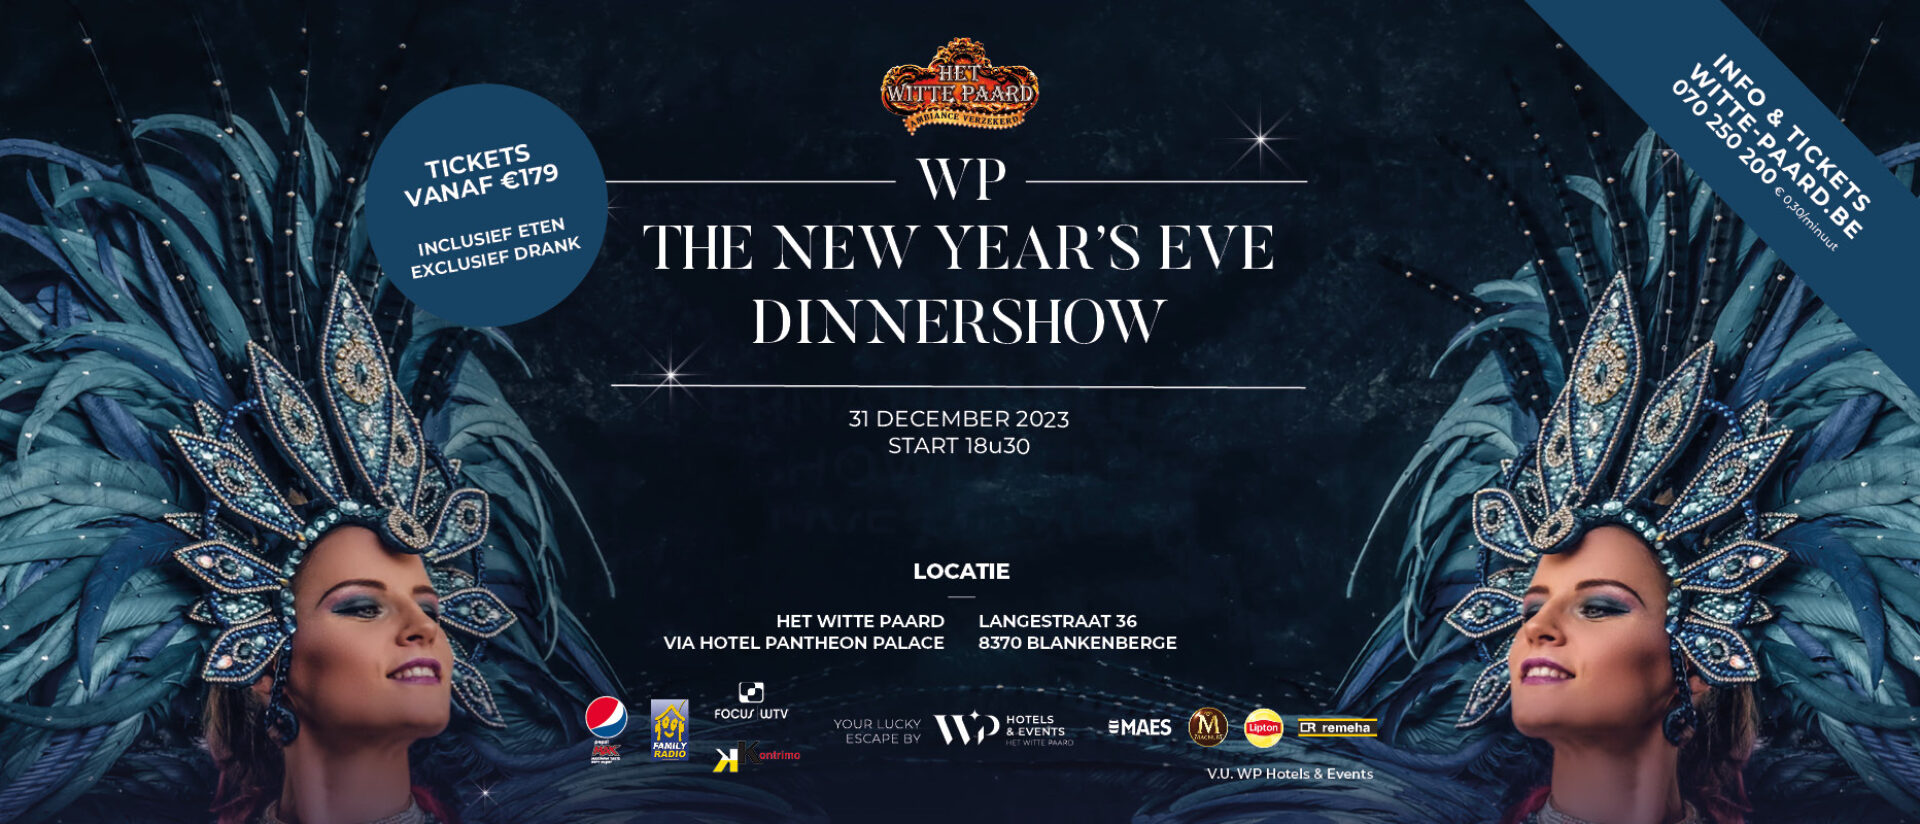 2775 WP THE DINNERSHOW NY EVE WIDE